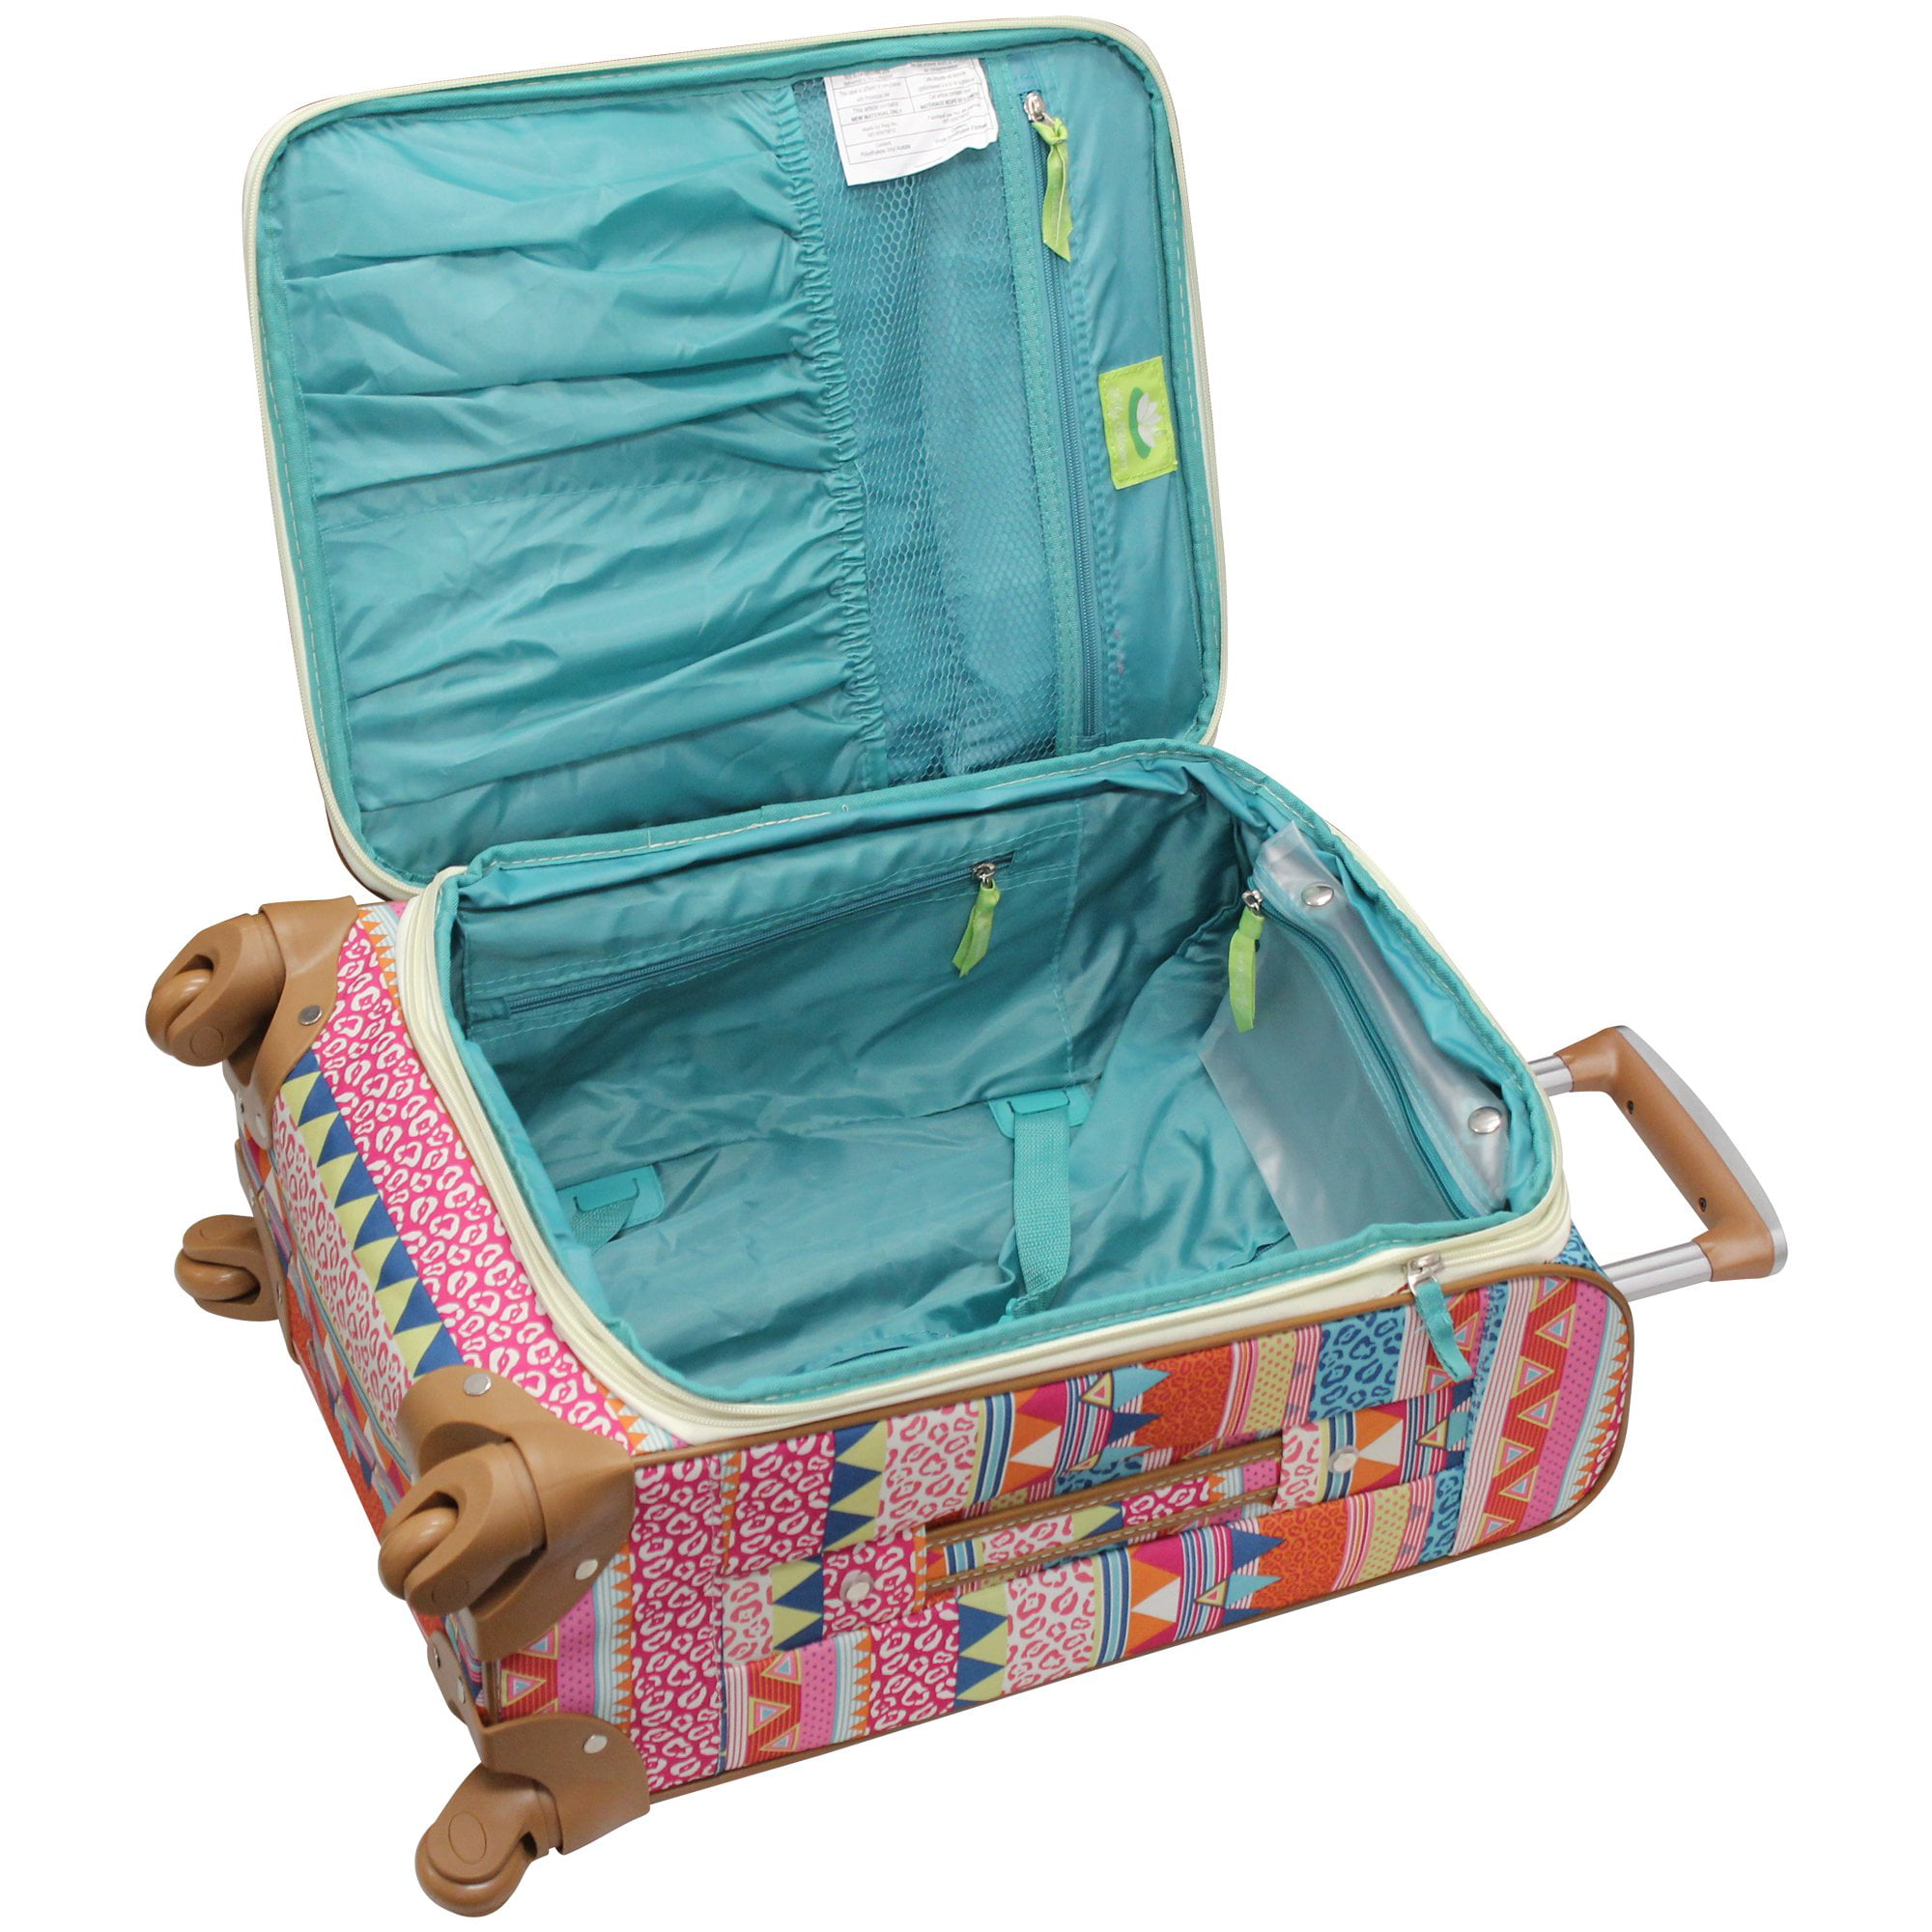 24in, Playful Garden Lily Bloom Luggage 24 Expandable Design Pattern Suitcase With Spinner Wheels For Woman